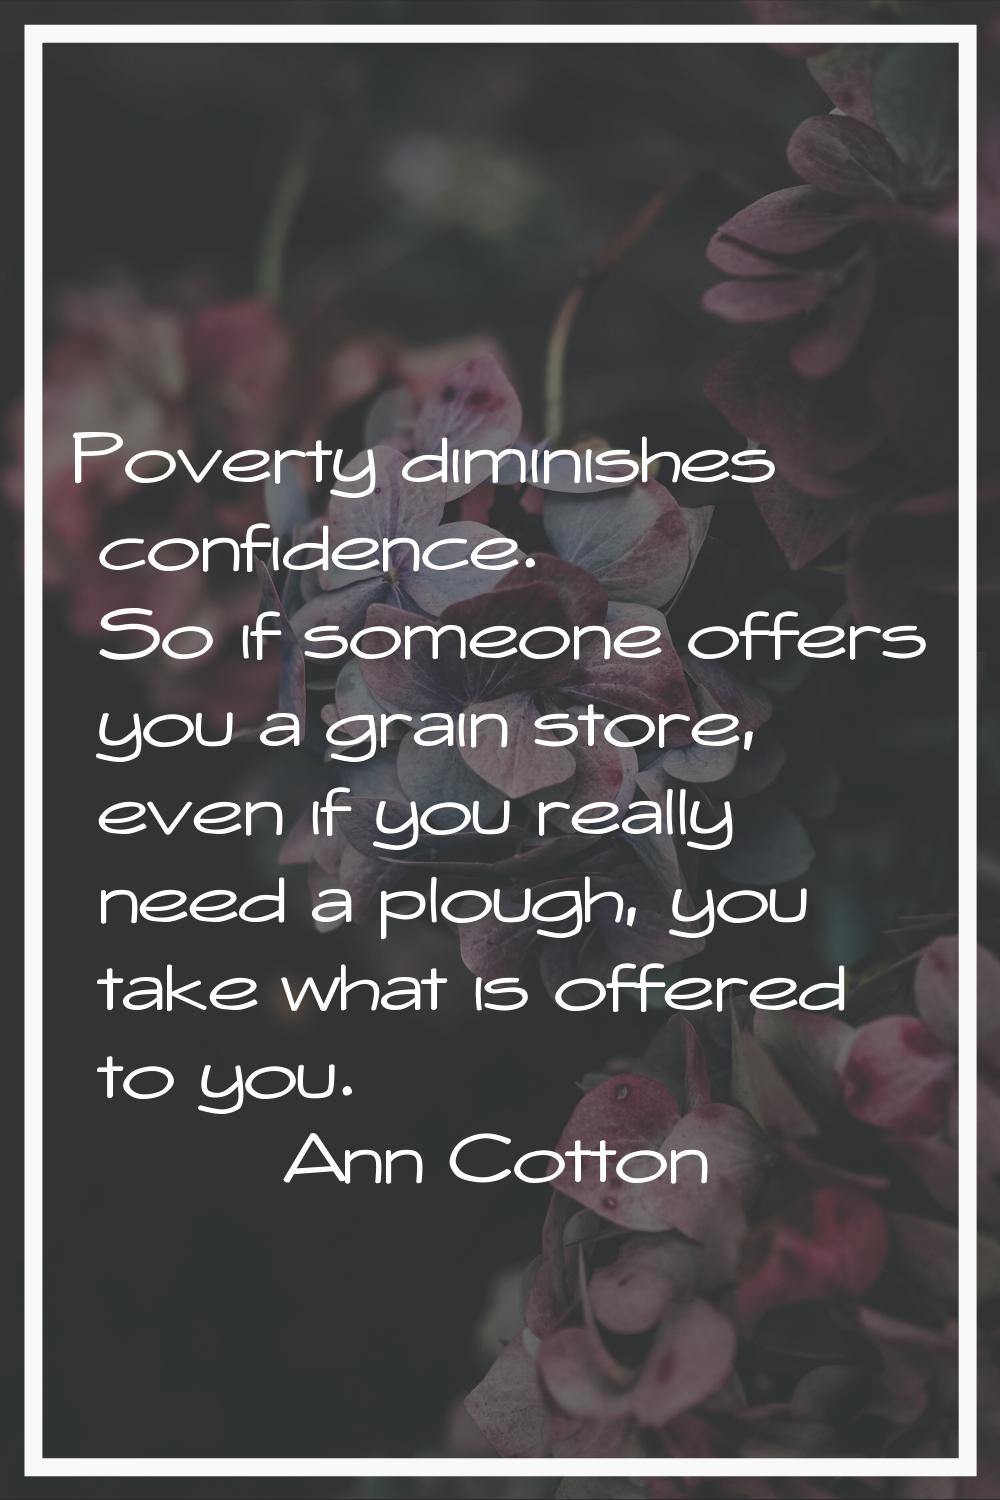 Poverty diminishes confidence. So if someone offers you a grain store, even if you really need a pl